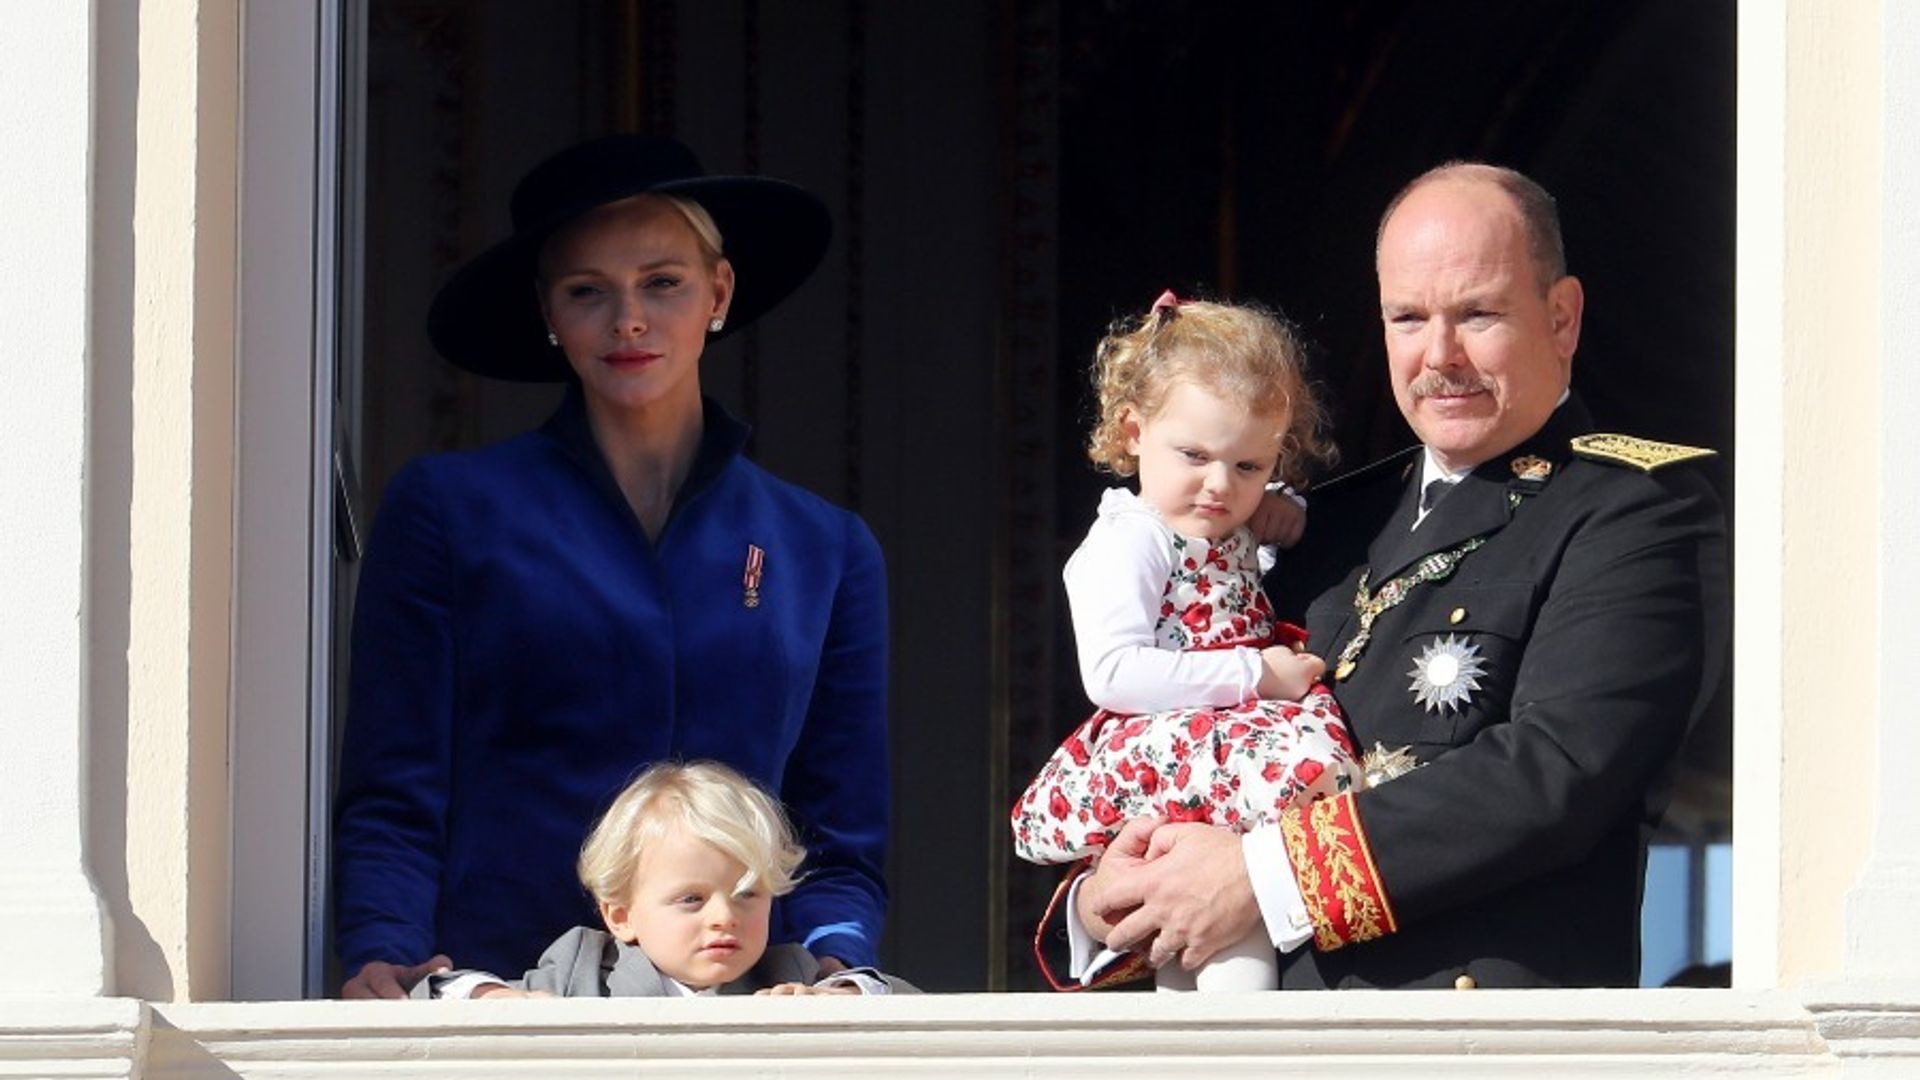 Prince Albert and Princess Charlene’s adorable twins steal spotlight at Monaco’s National Day Ceremony